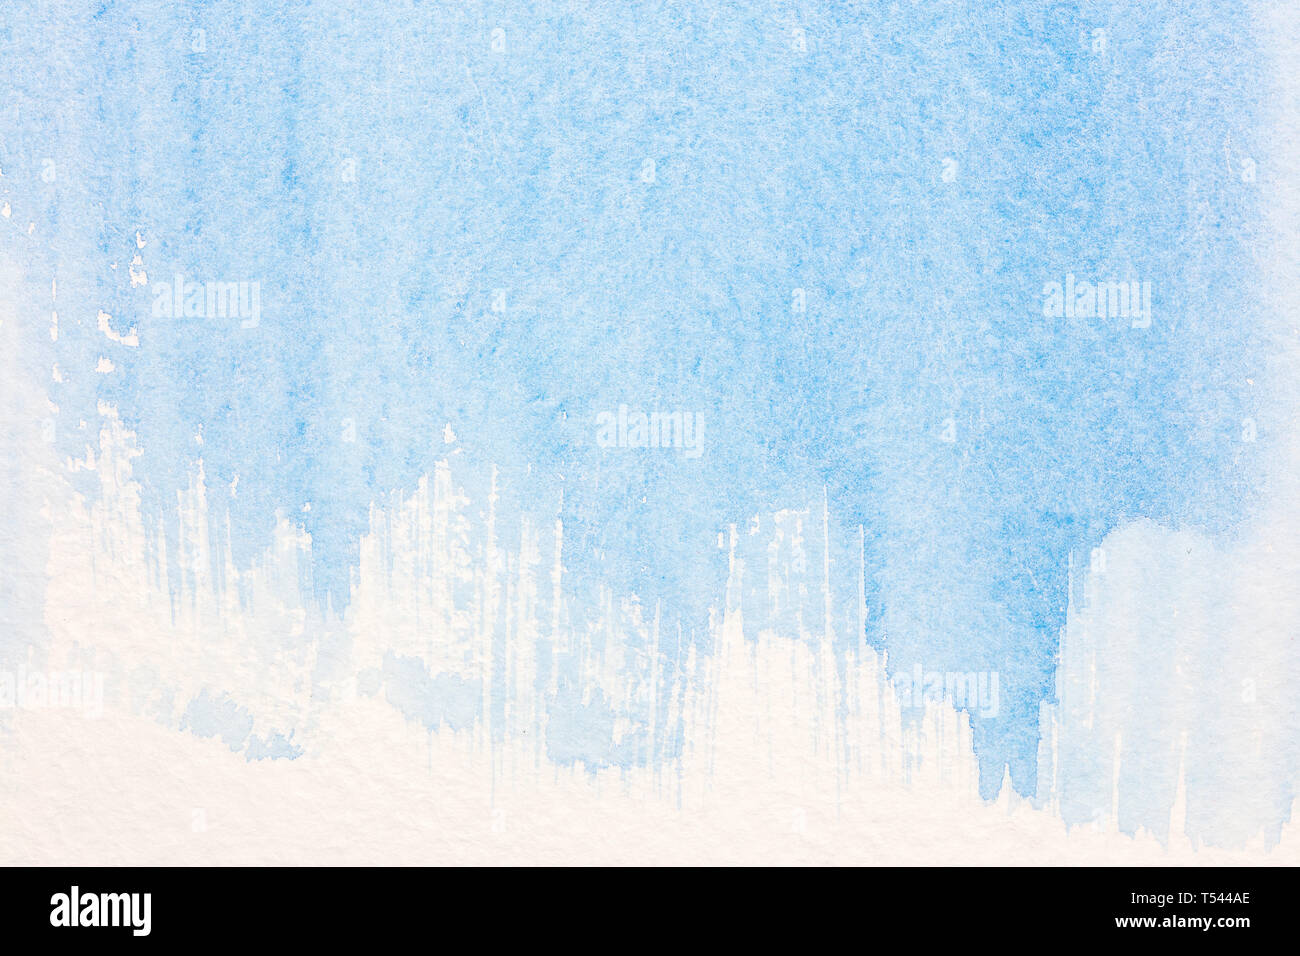 hand painted blue watercolor background with expressive brush strokes Stock Photo